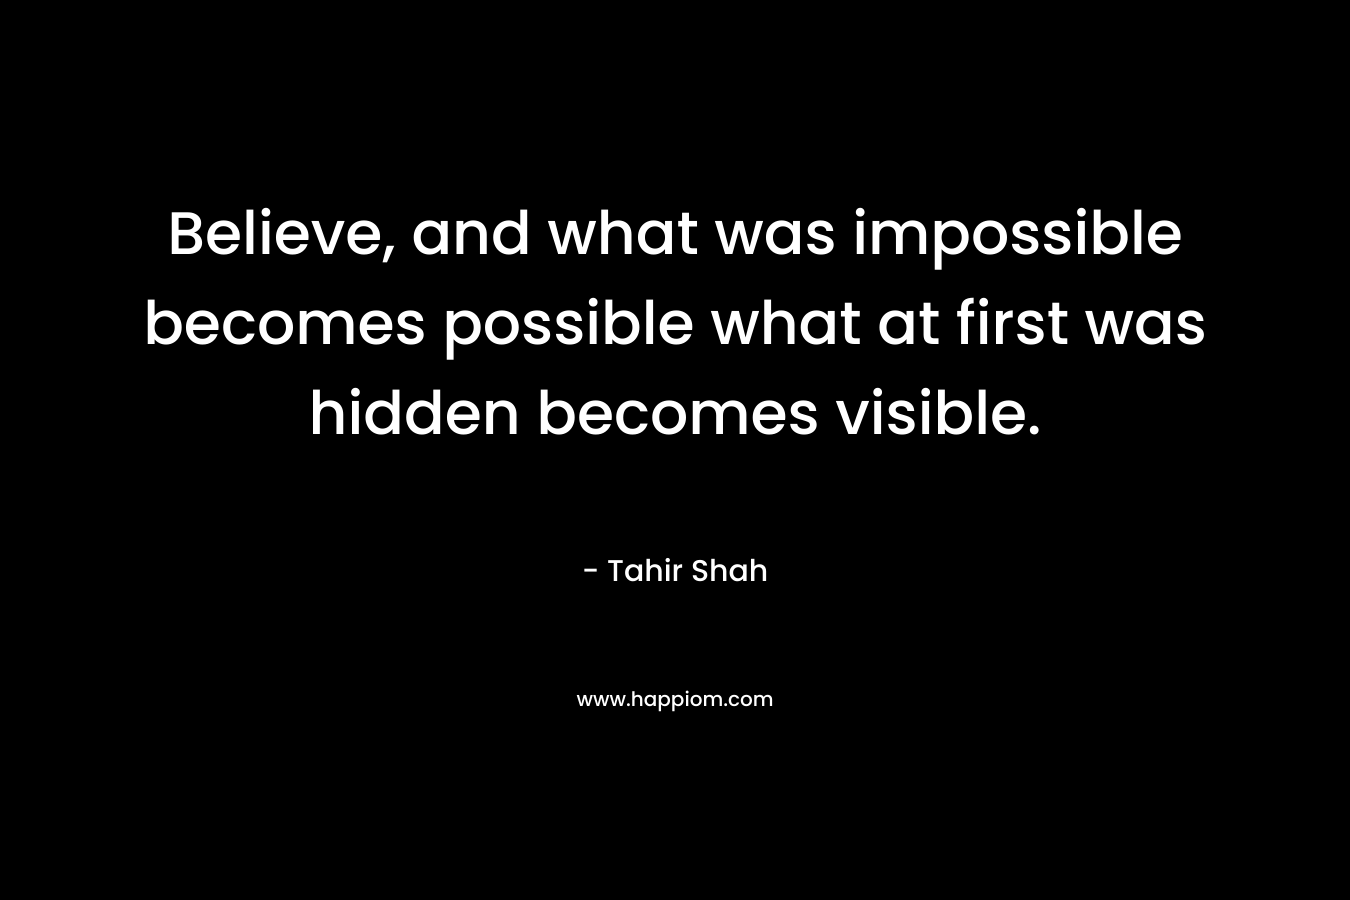 Believe, and what was impossible becomes possible what at first was hidden becomes visible.